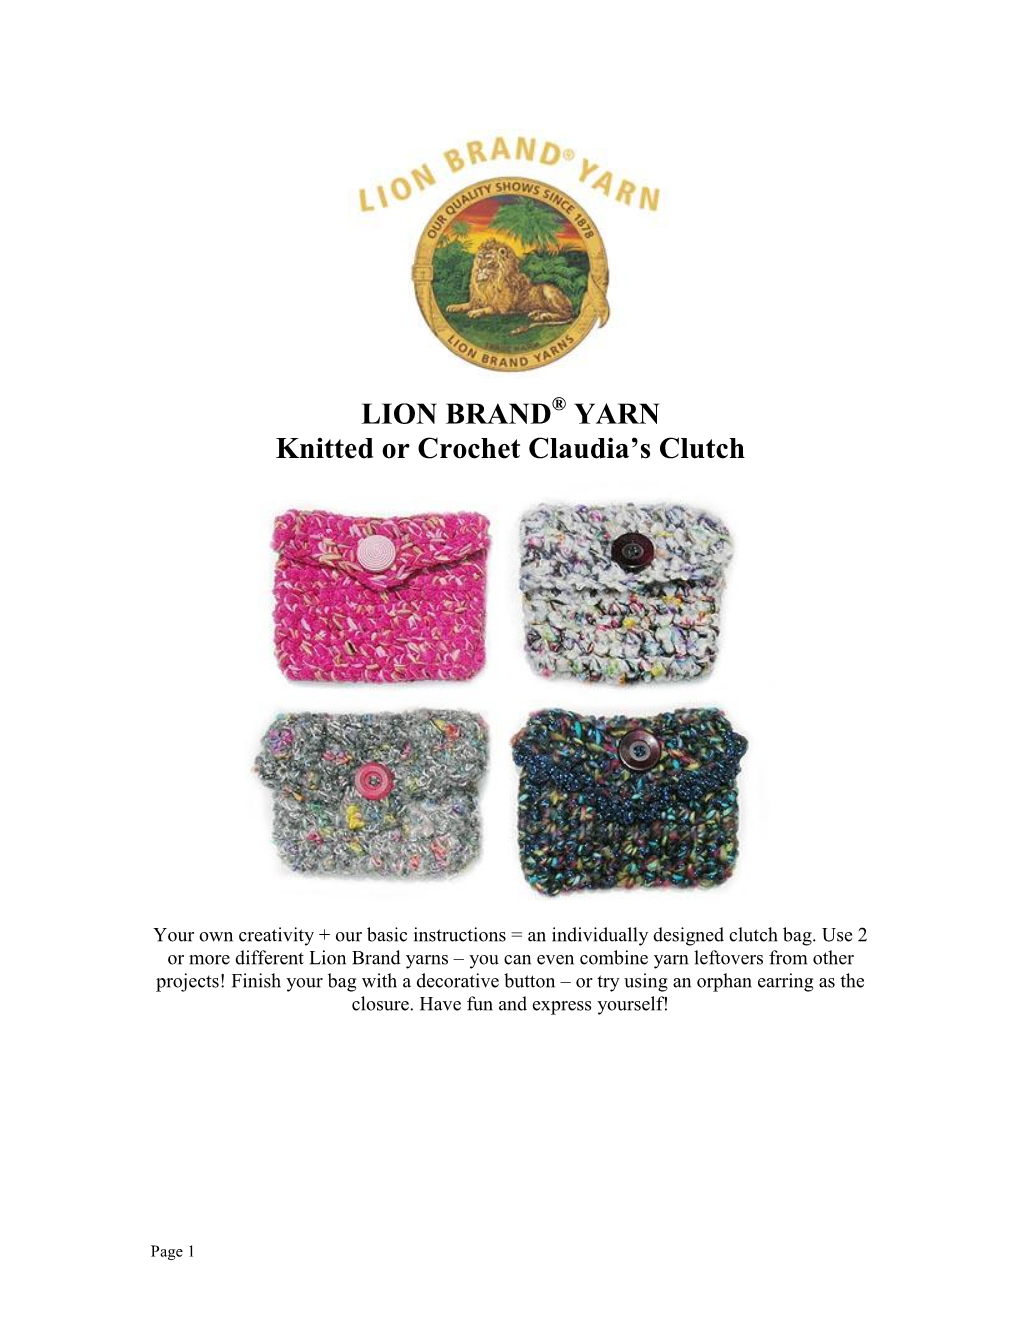 LION BRAND YARN Knitted Or Crochet Claudia's Clutch